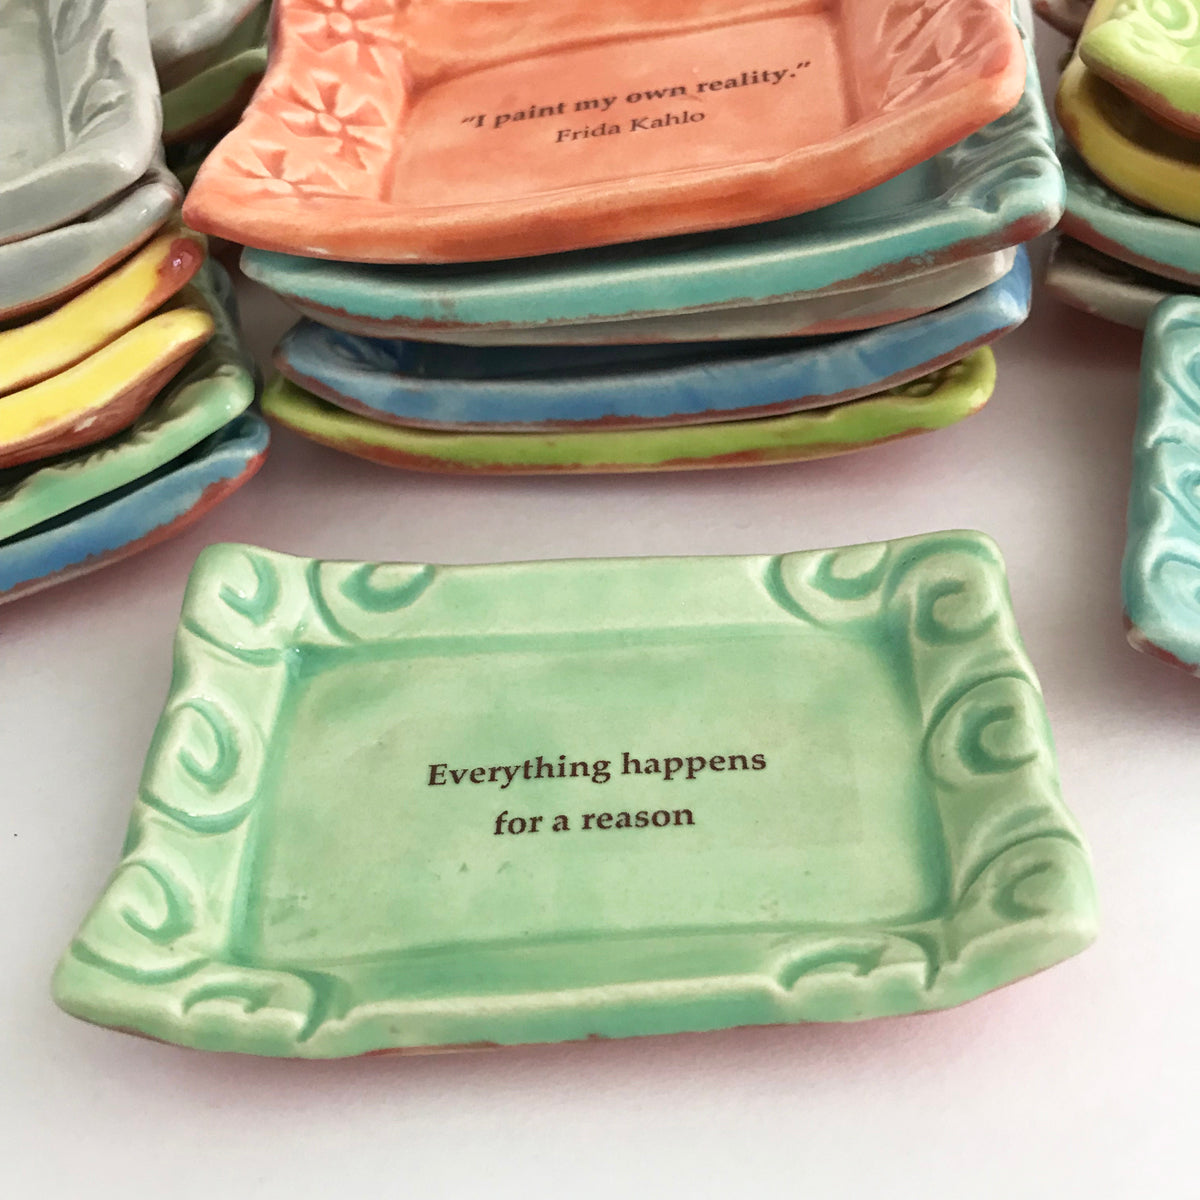 &quot;Everything happens for a reason&quot; quote on handmade ceramic dish.  